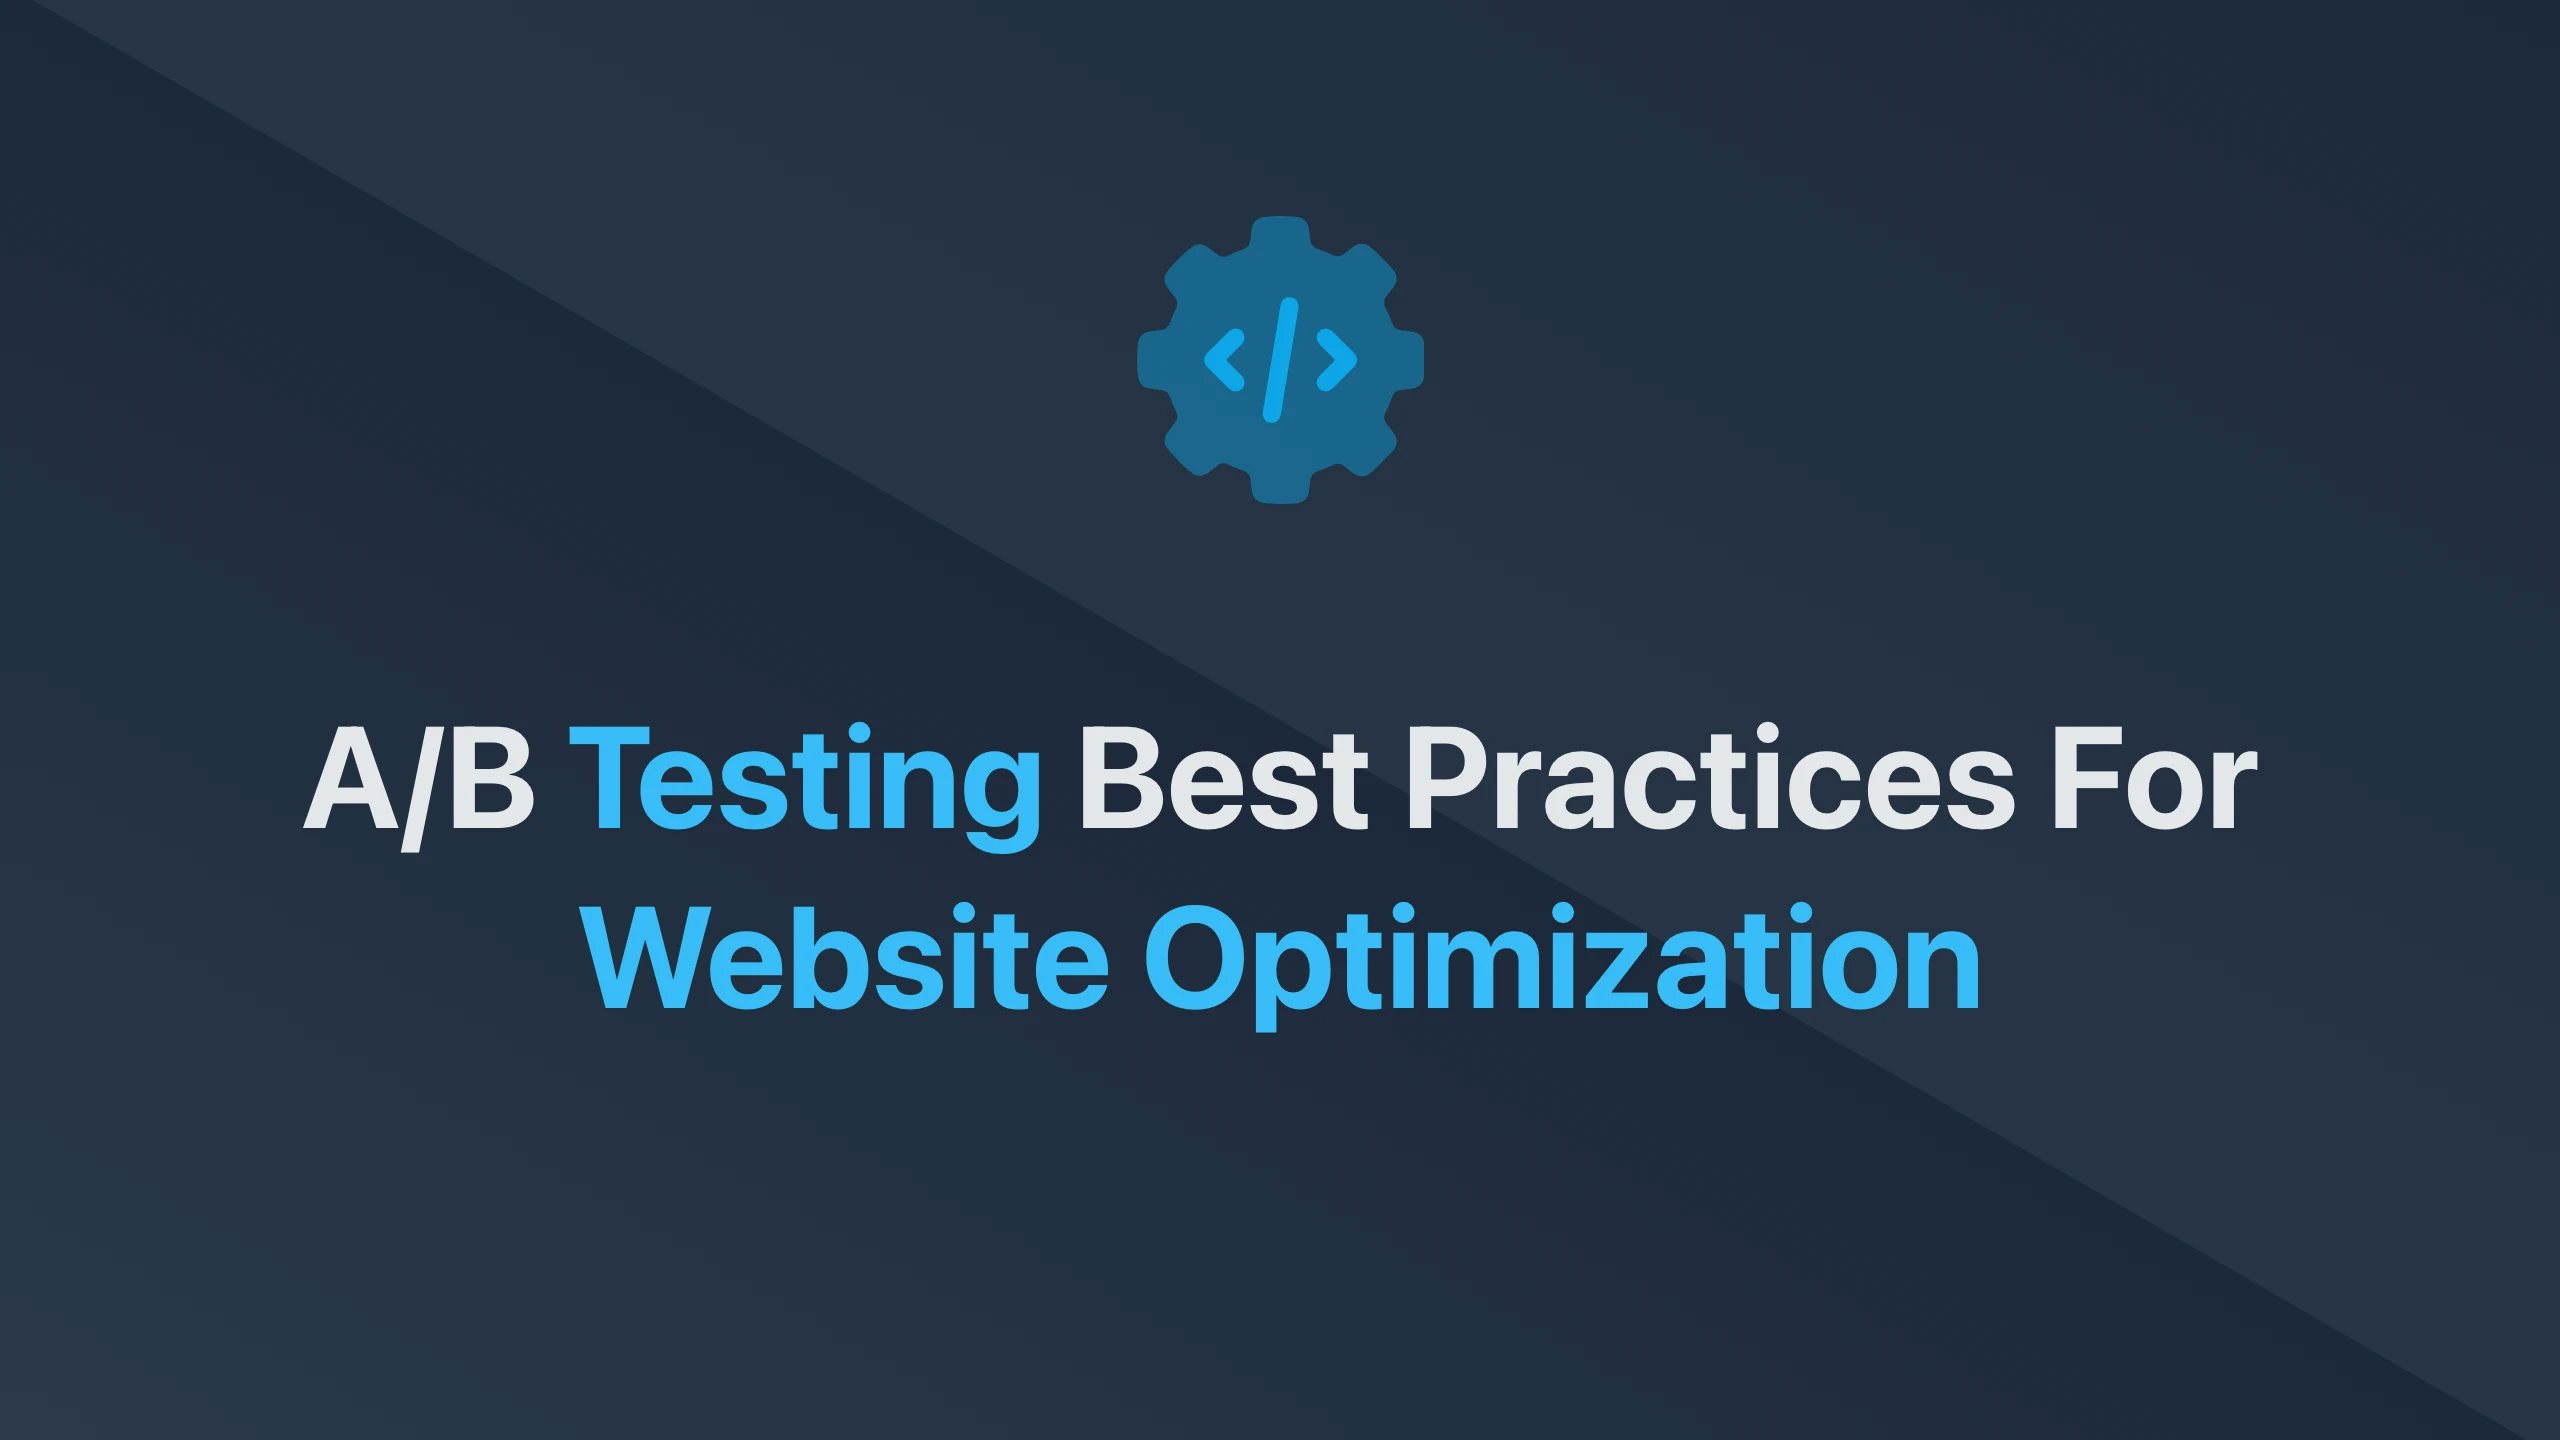 Cover Image for A/B Testing Best Practices for Website Optimization